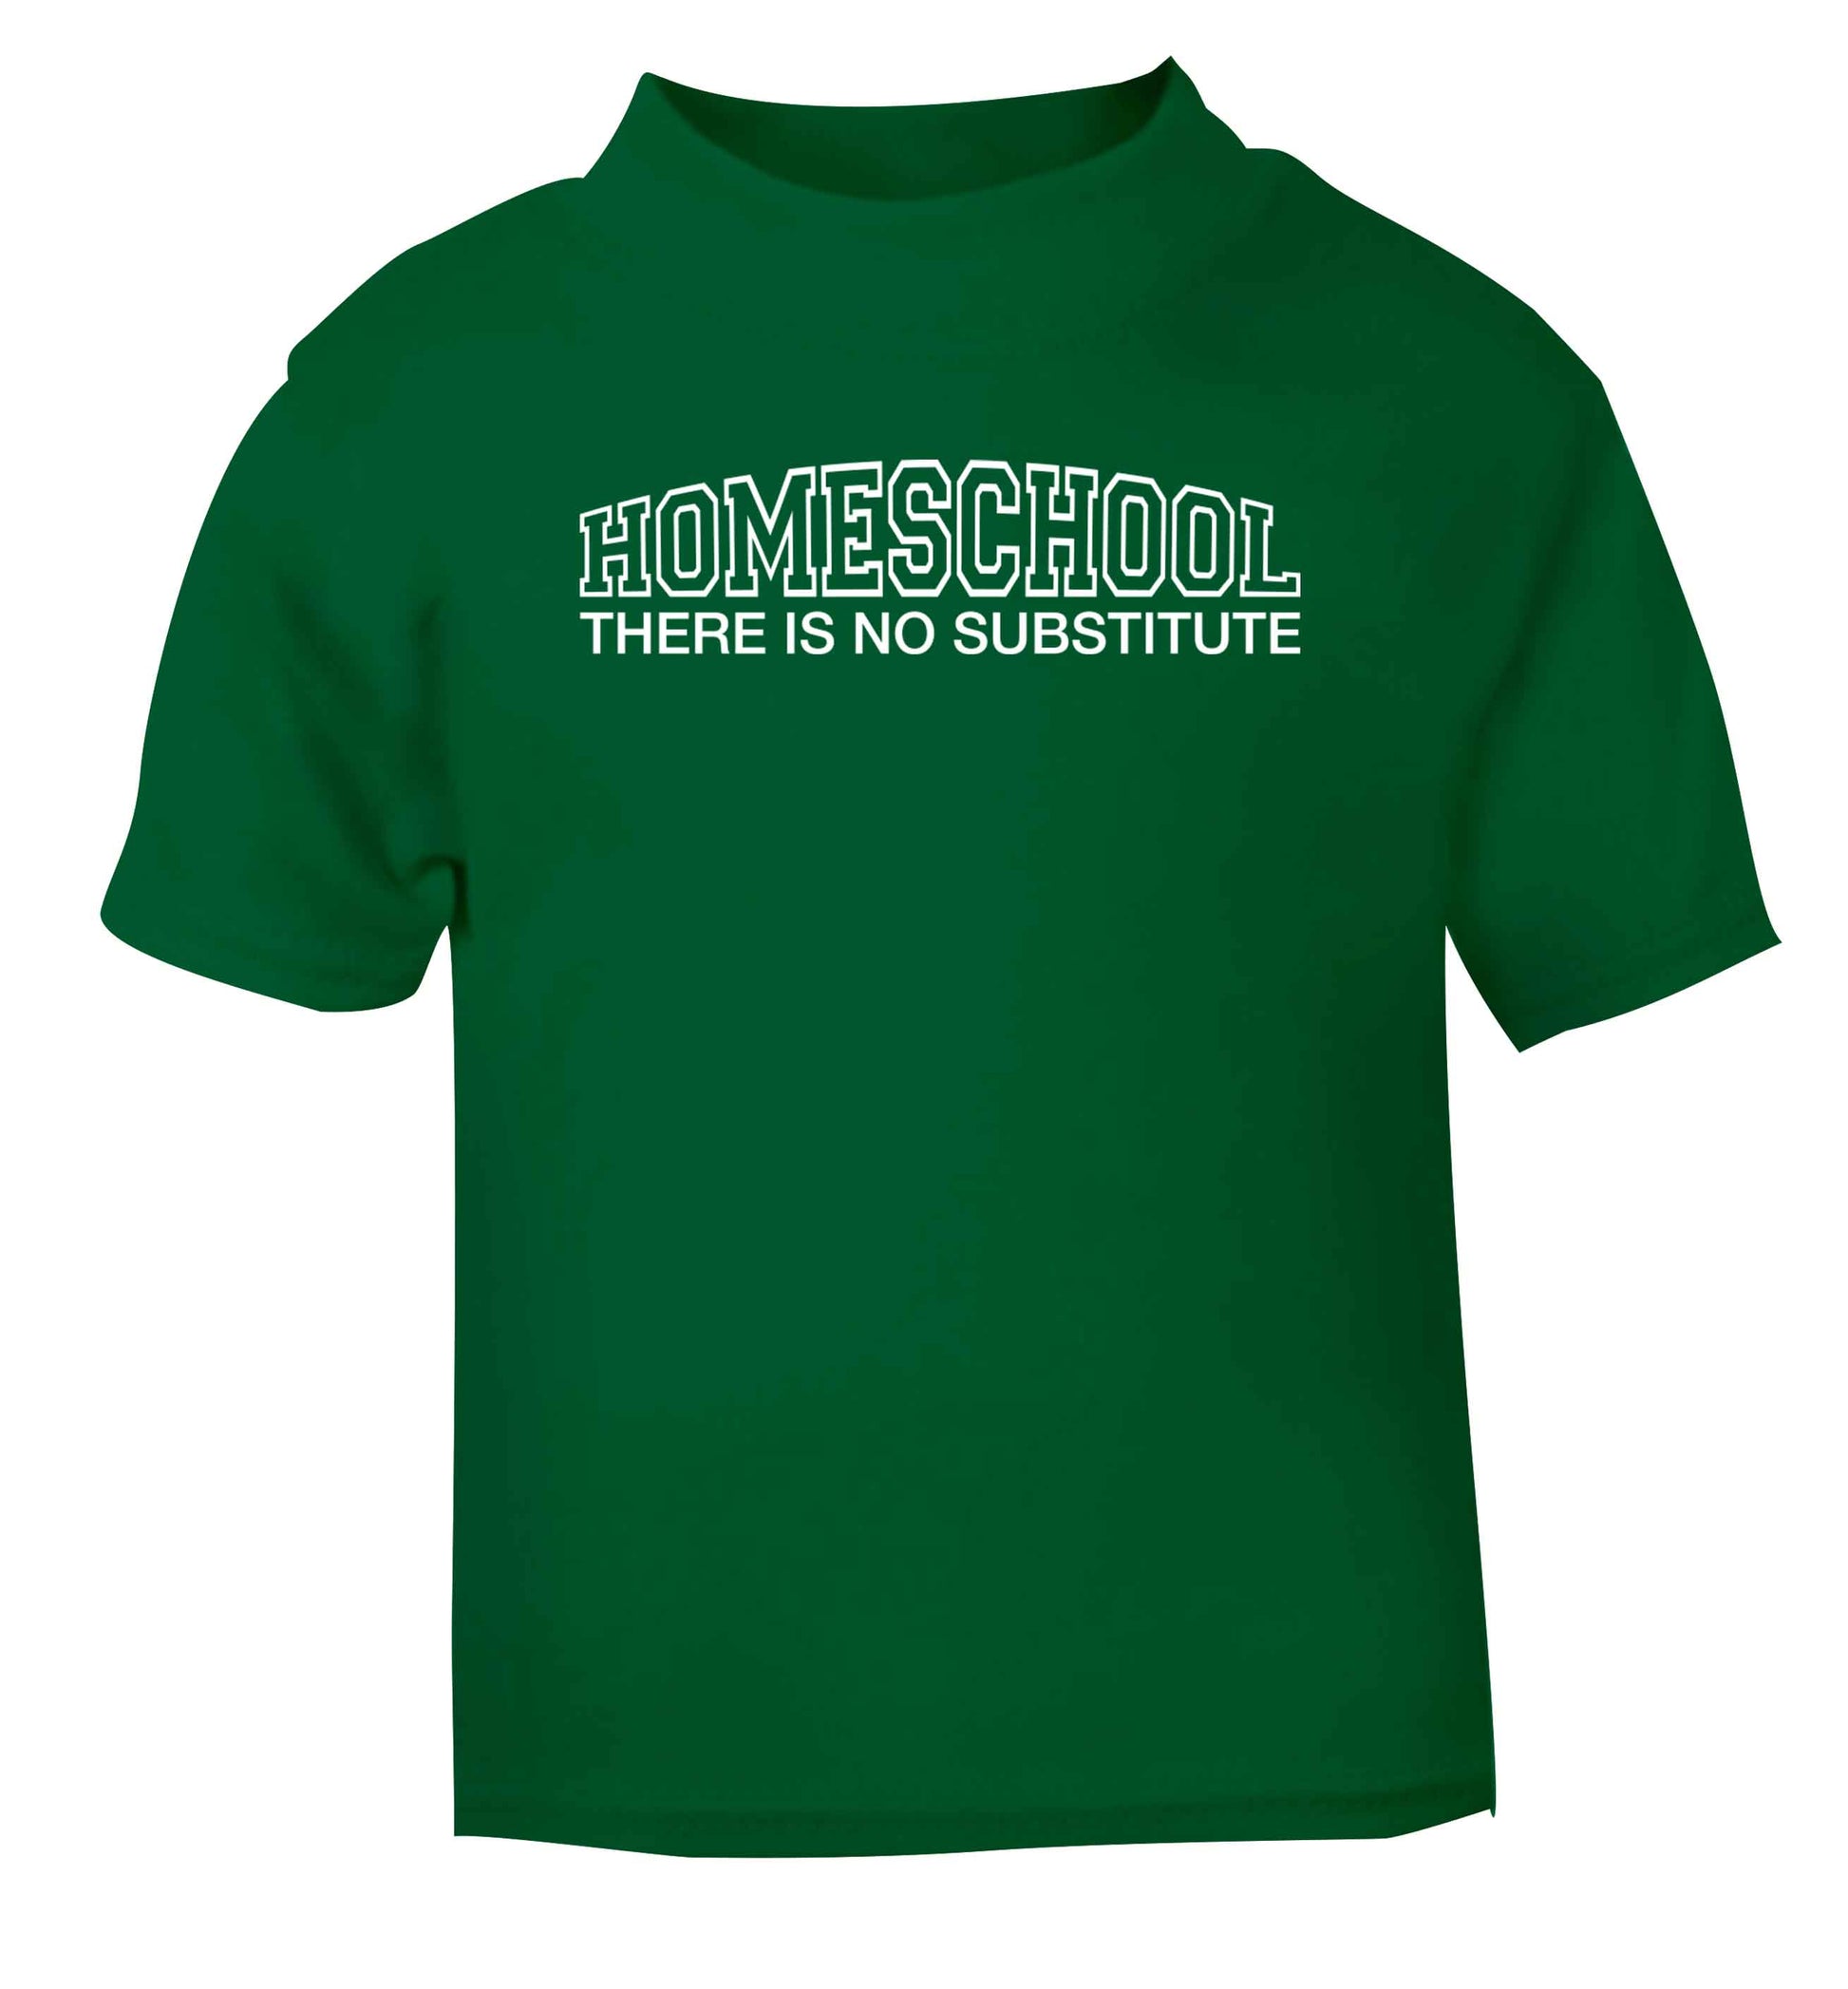 Homeschool there is not substitute green Baby Toddler Tshirt 2 Years